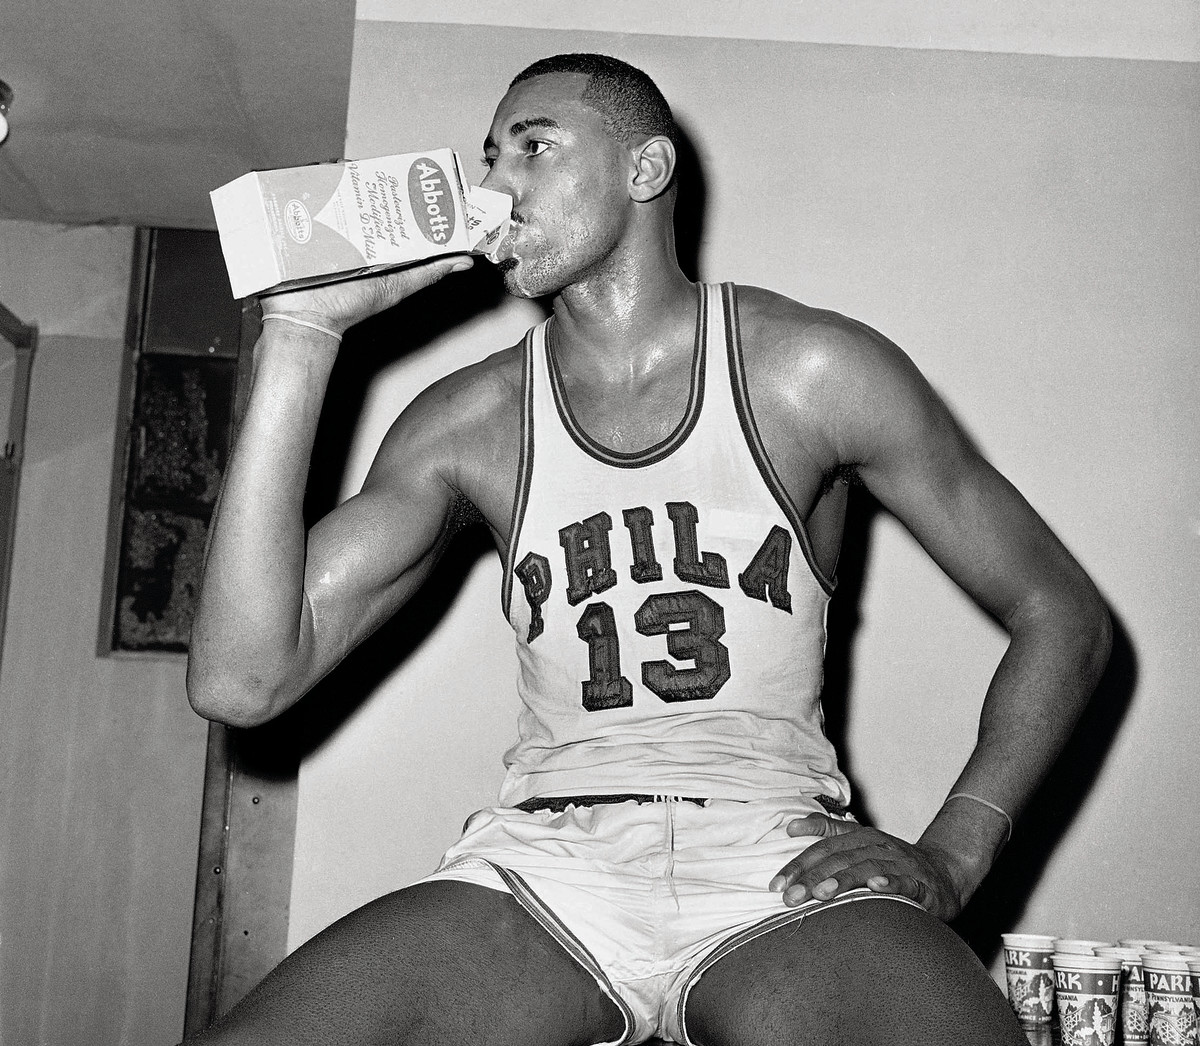 Immediately after Wilt Chamberlain scored 100 points in a game, he downed a carton of milk.